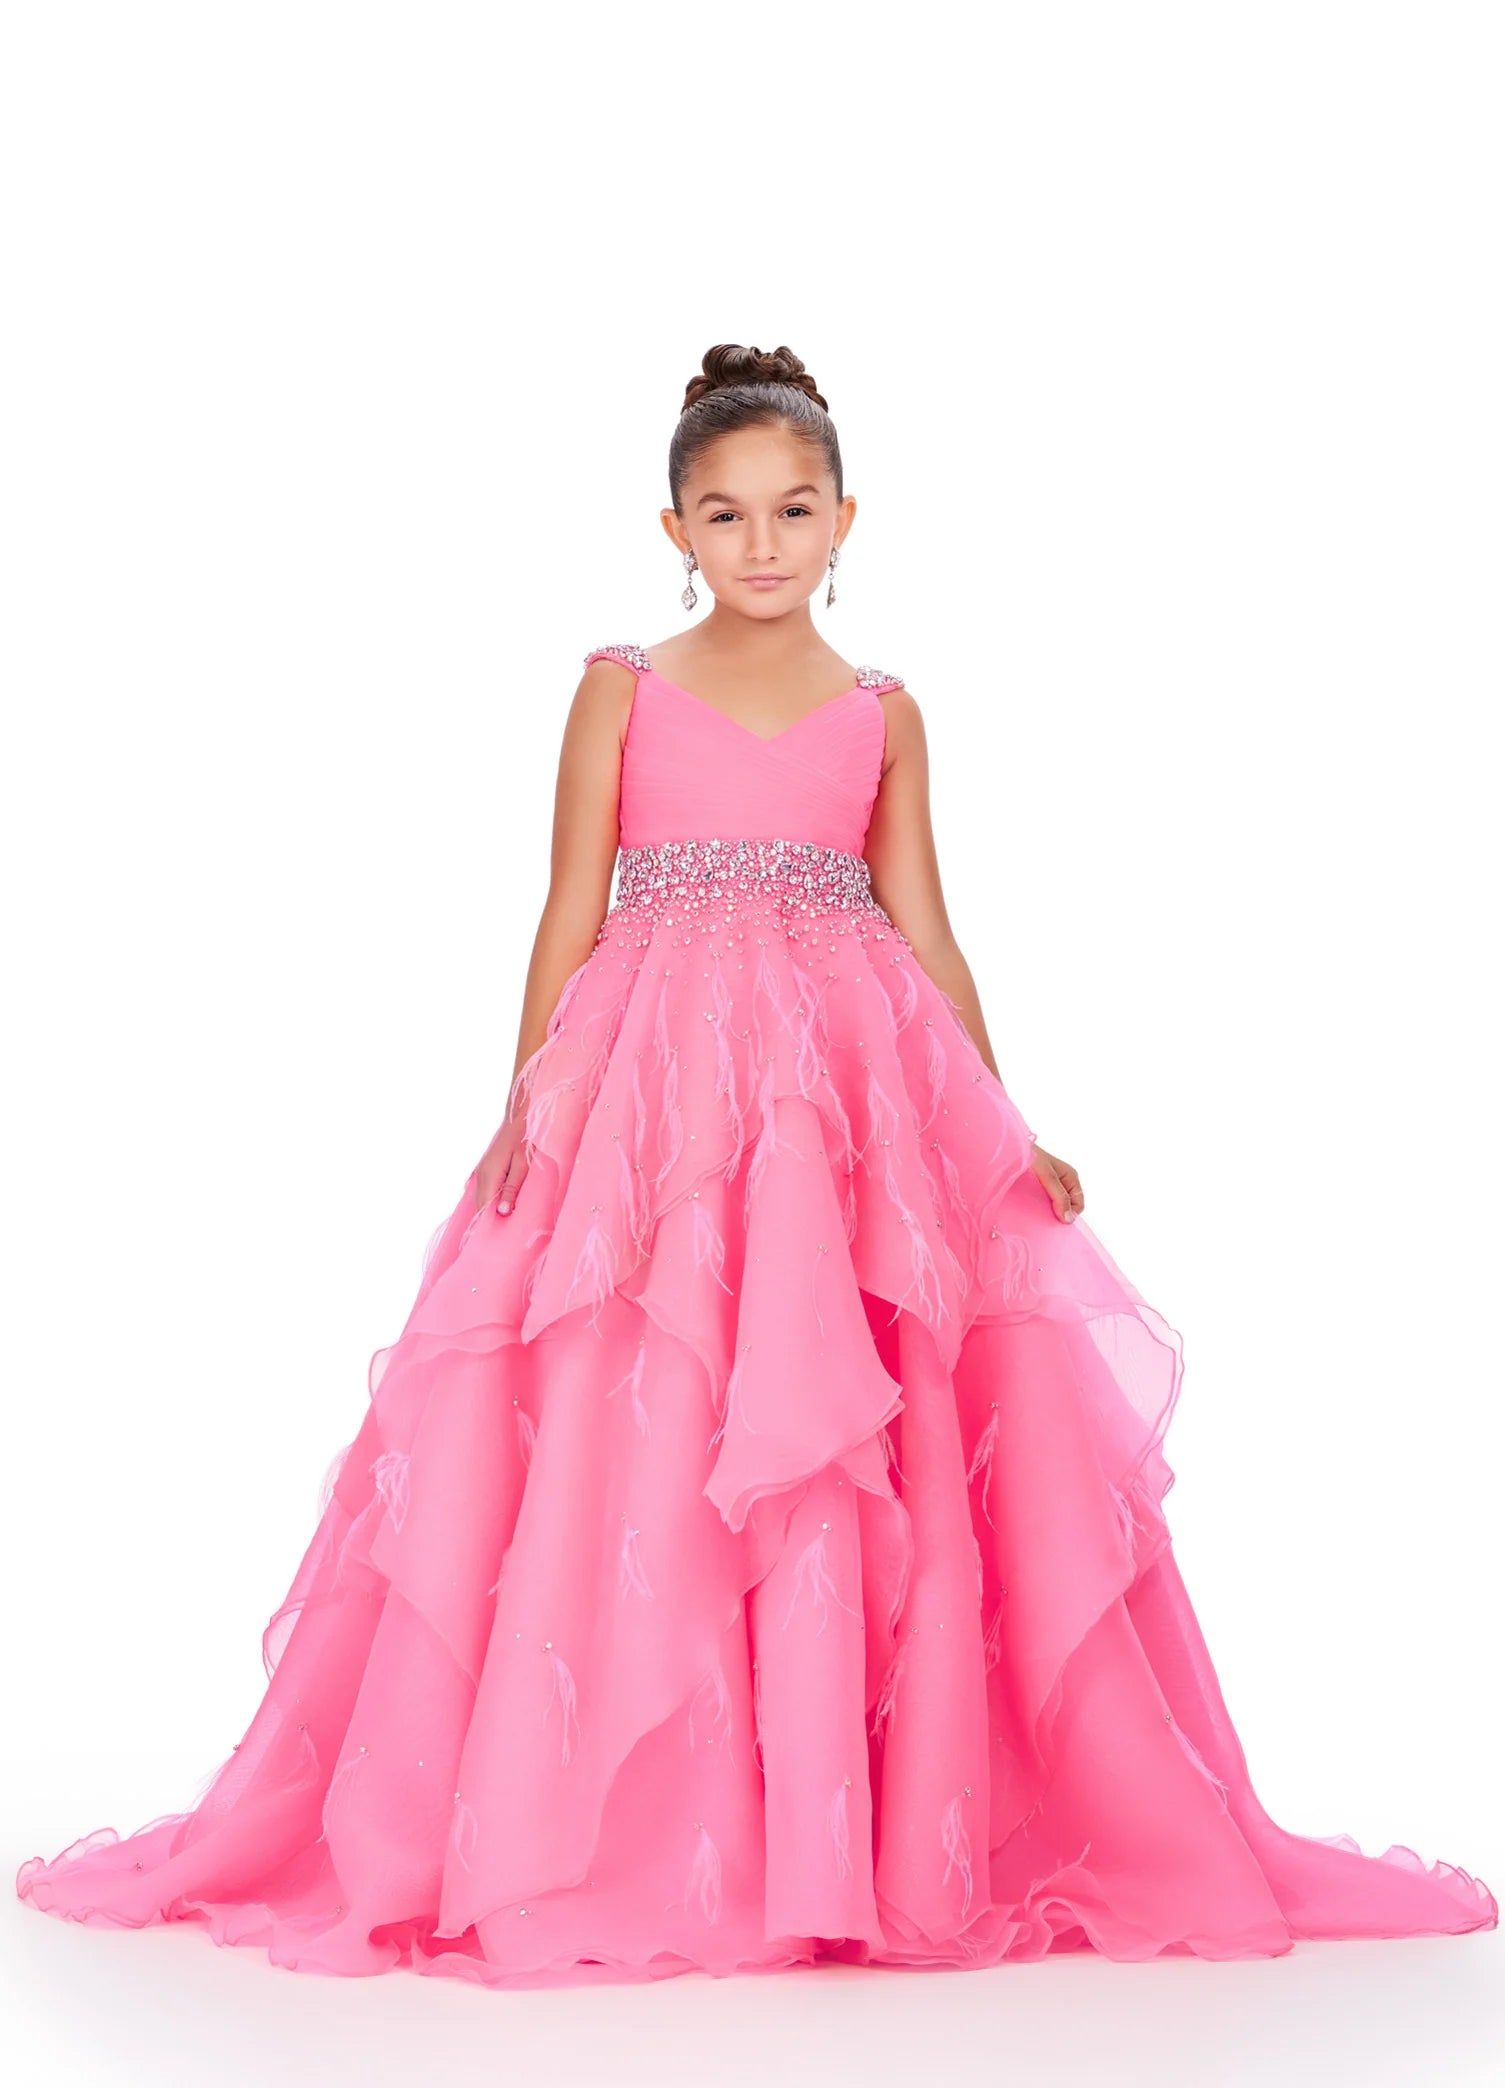 Girls Fashion Pink Gowns, Size: S, M and L at Rs 1995 in New Delhi